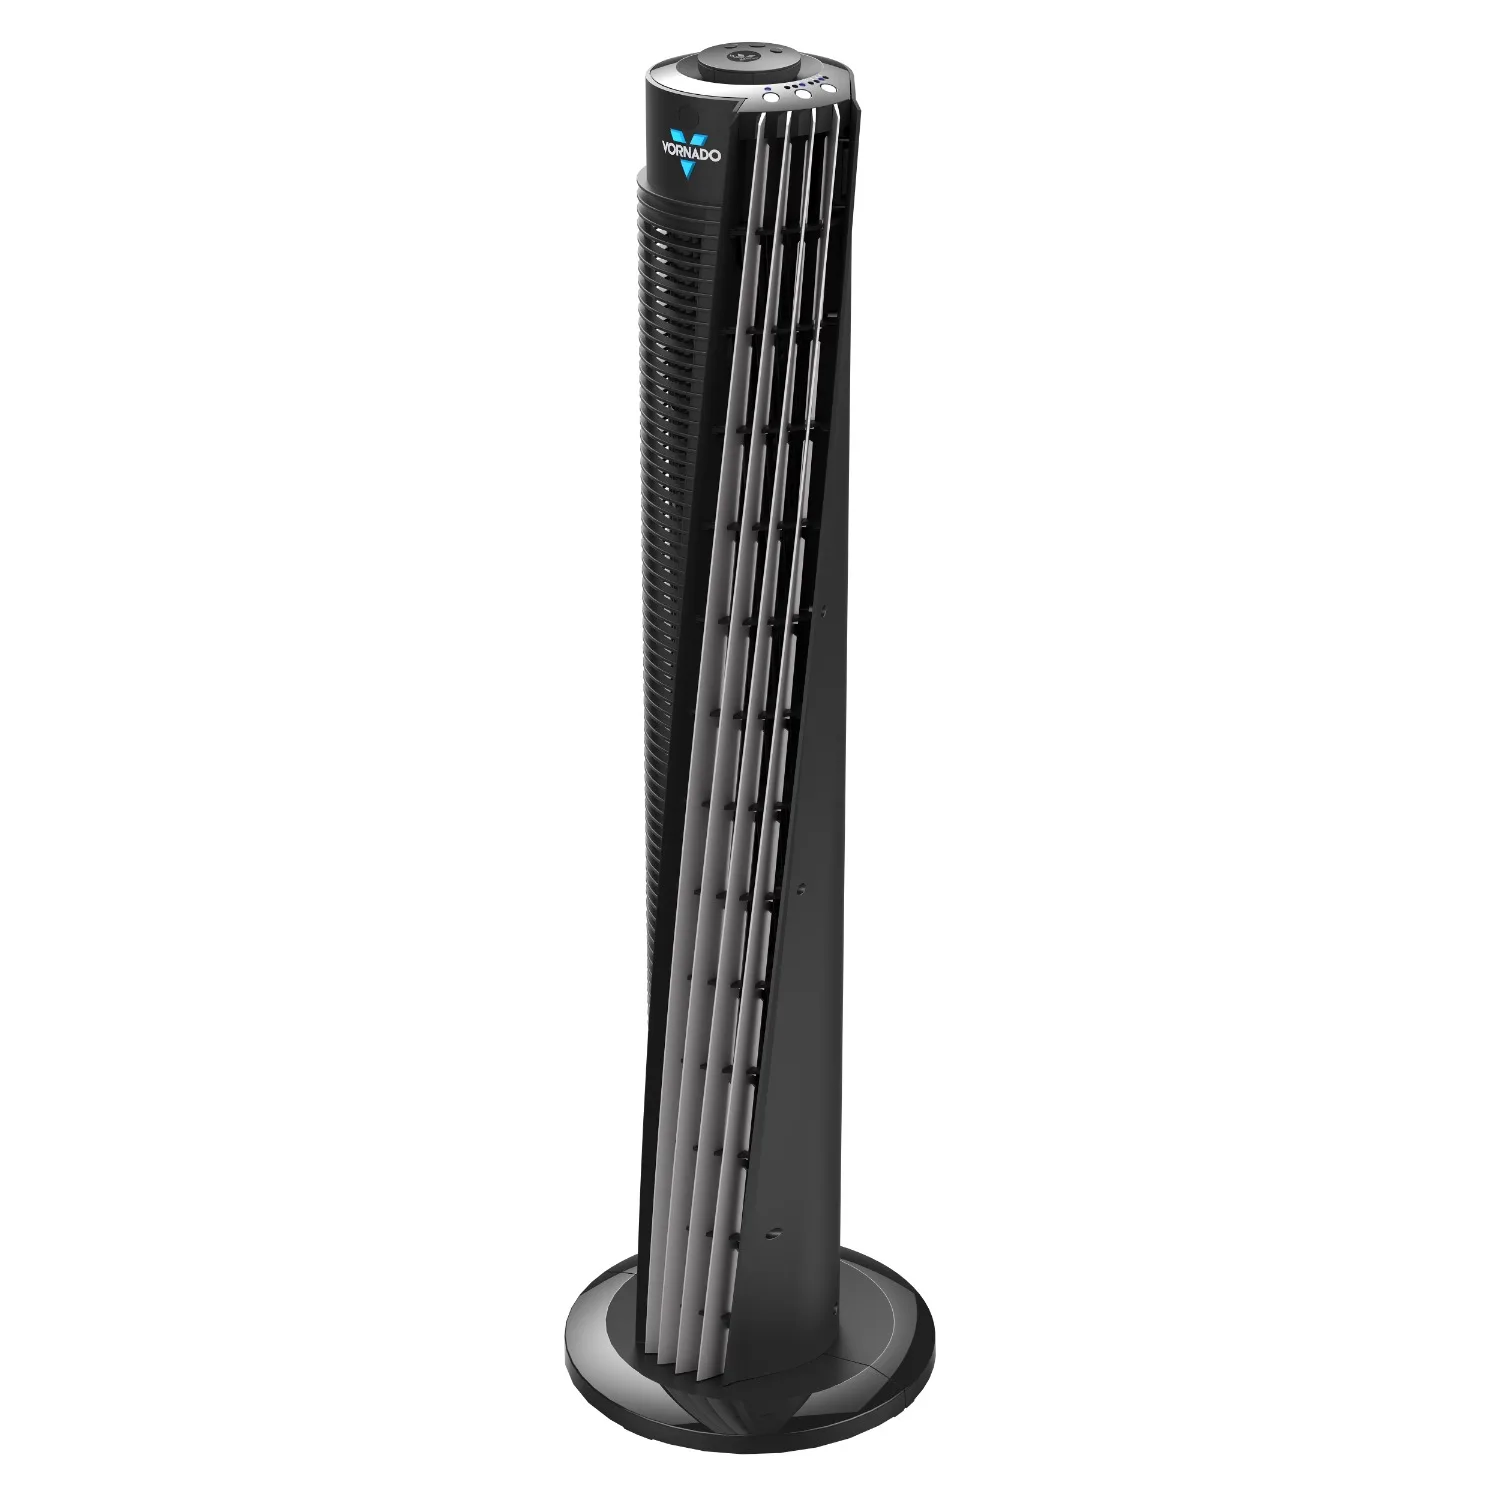 

37" V-flow Air Circulator Tower Fan with Remote Control